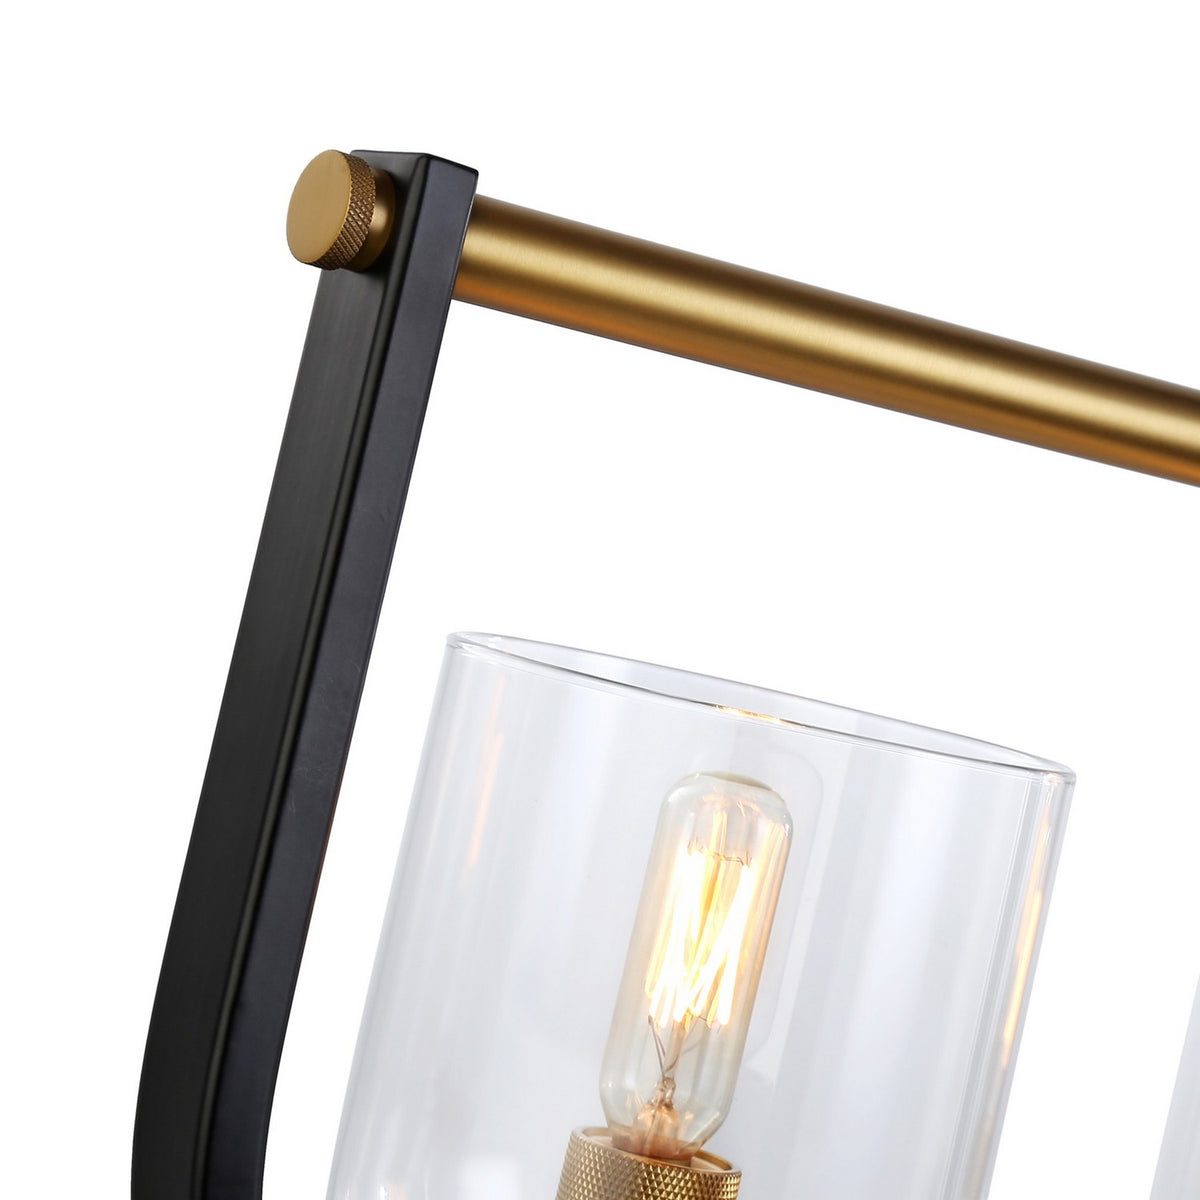 Artcraft Five Light Island Pendant from the Cheshire collection in Black & Brass finish